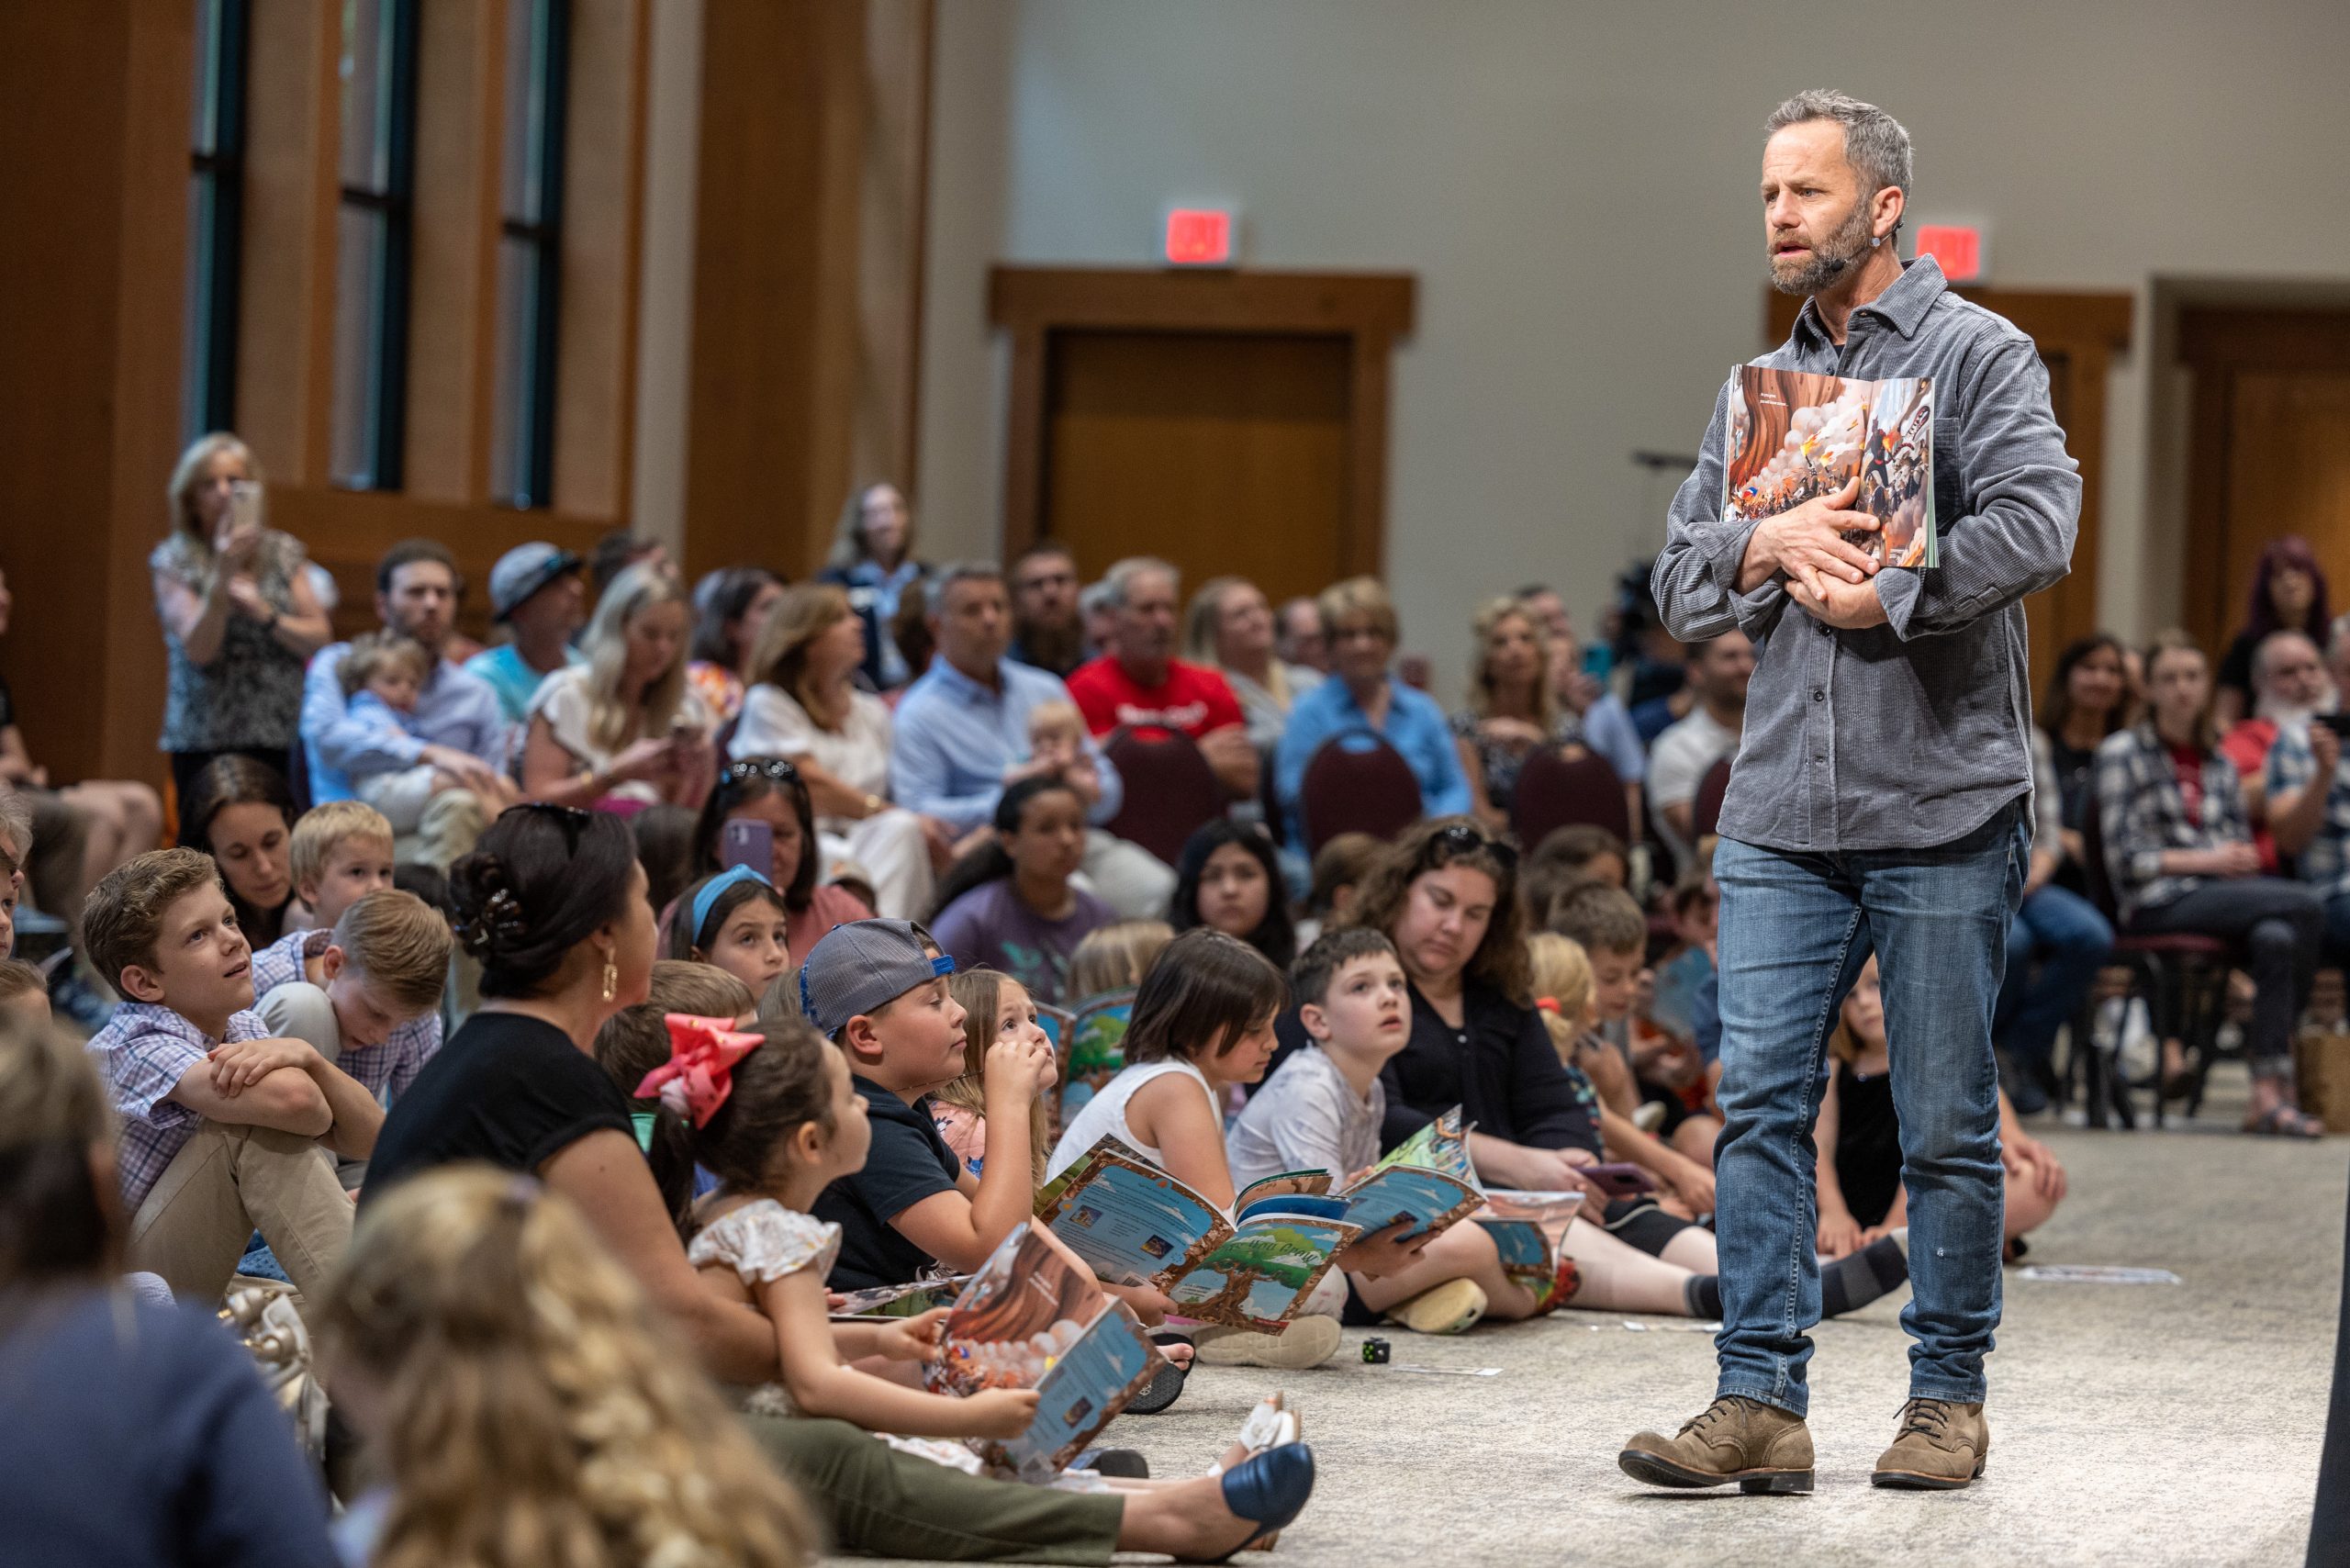 kirk cameron library tour 2023 schedule